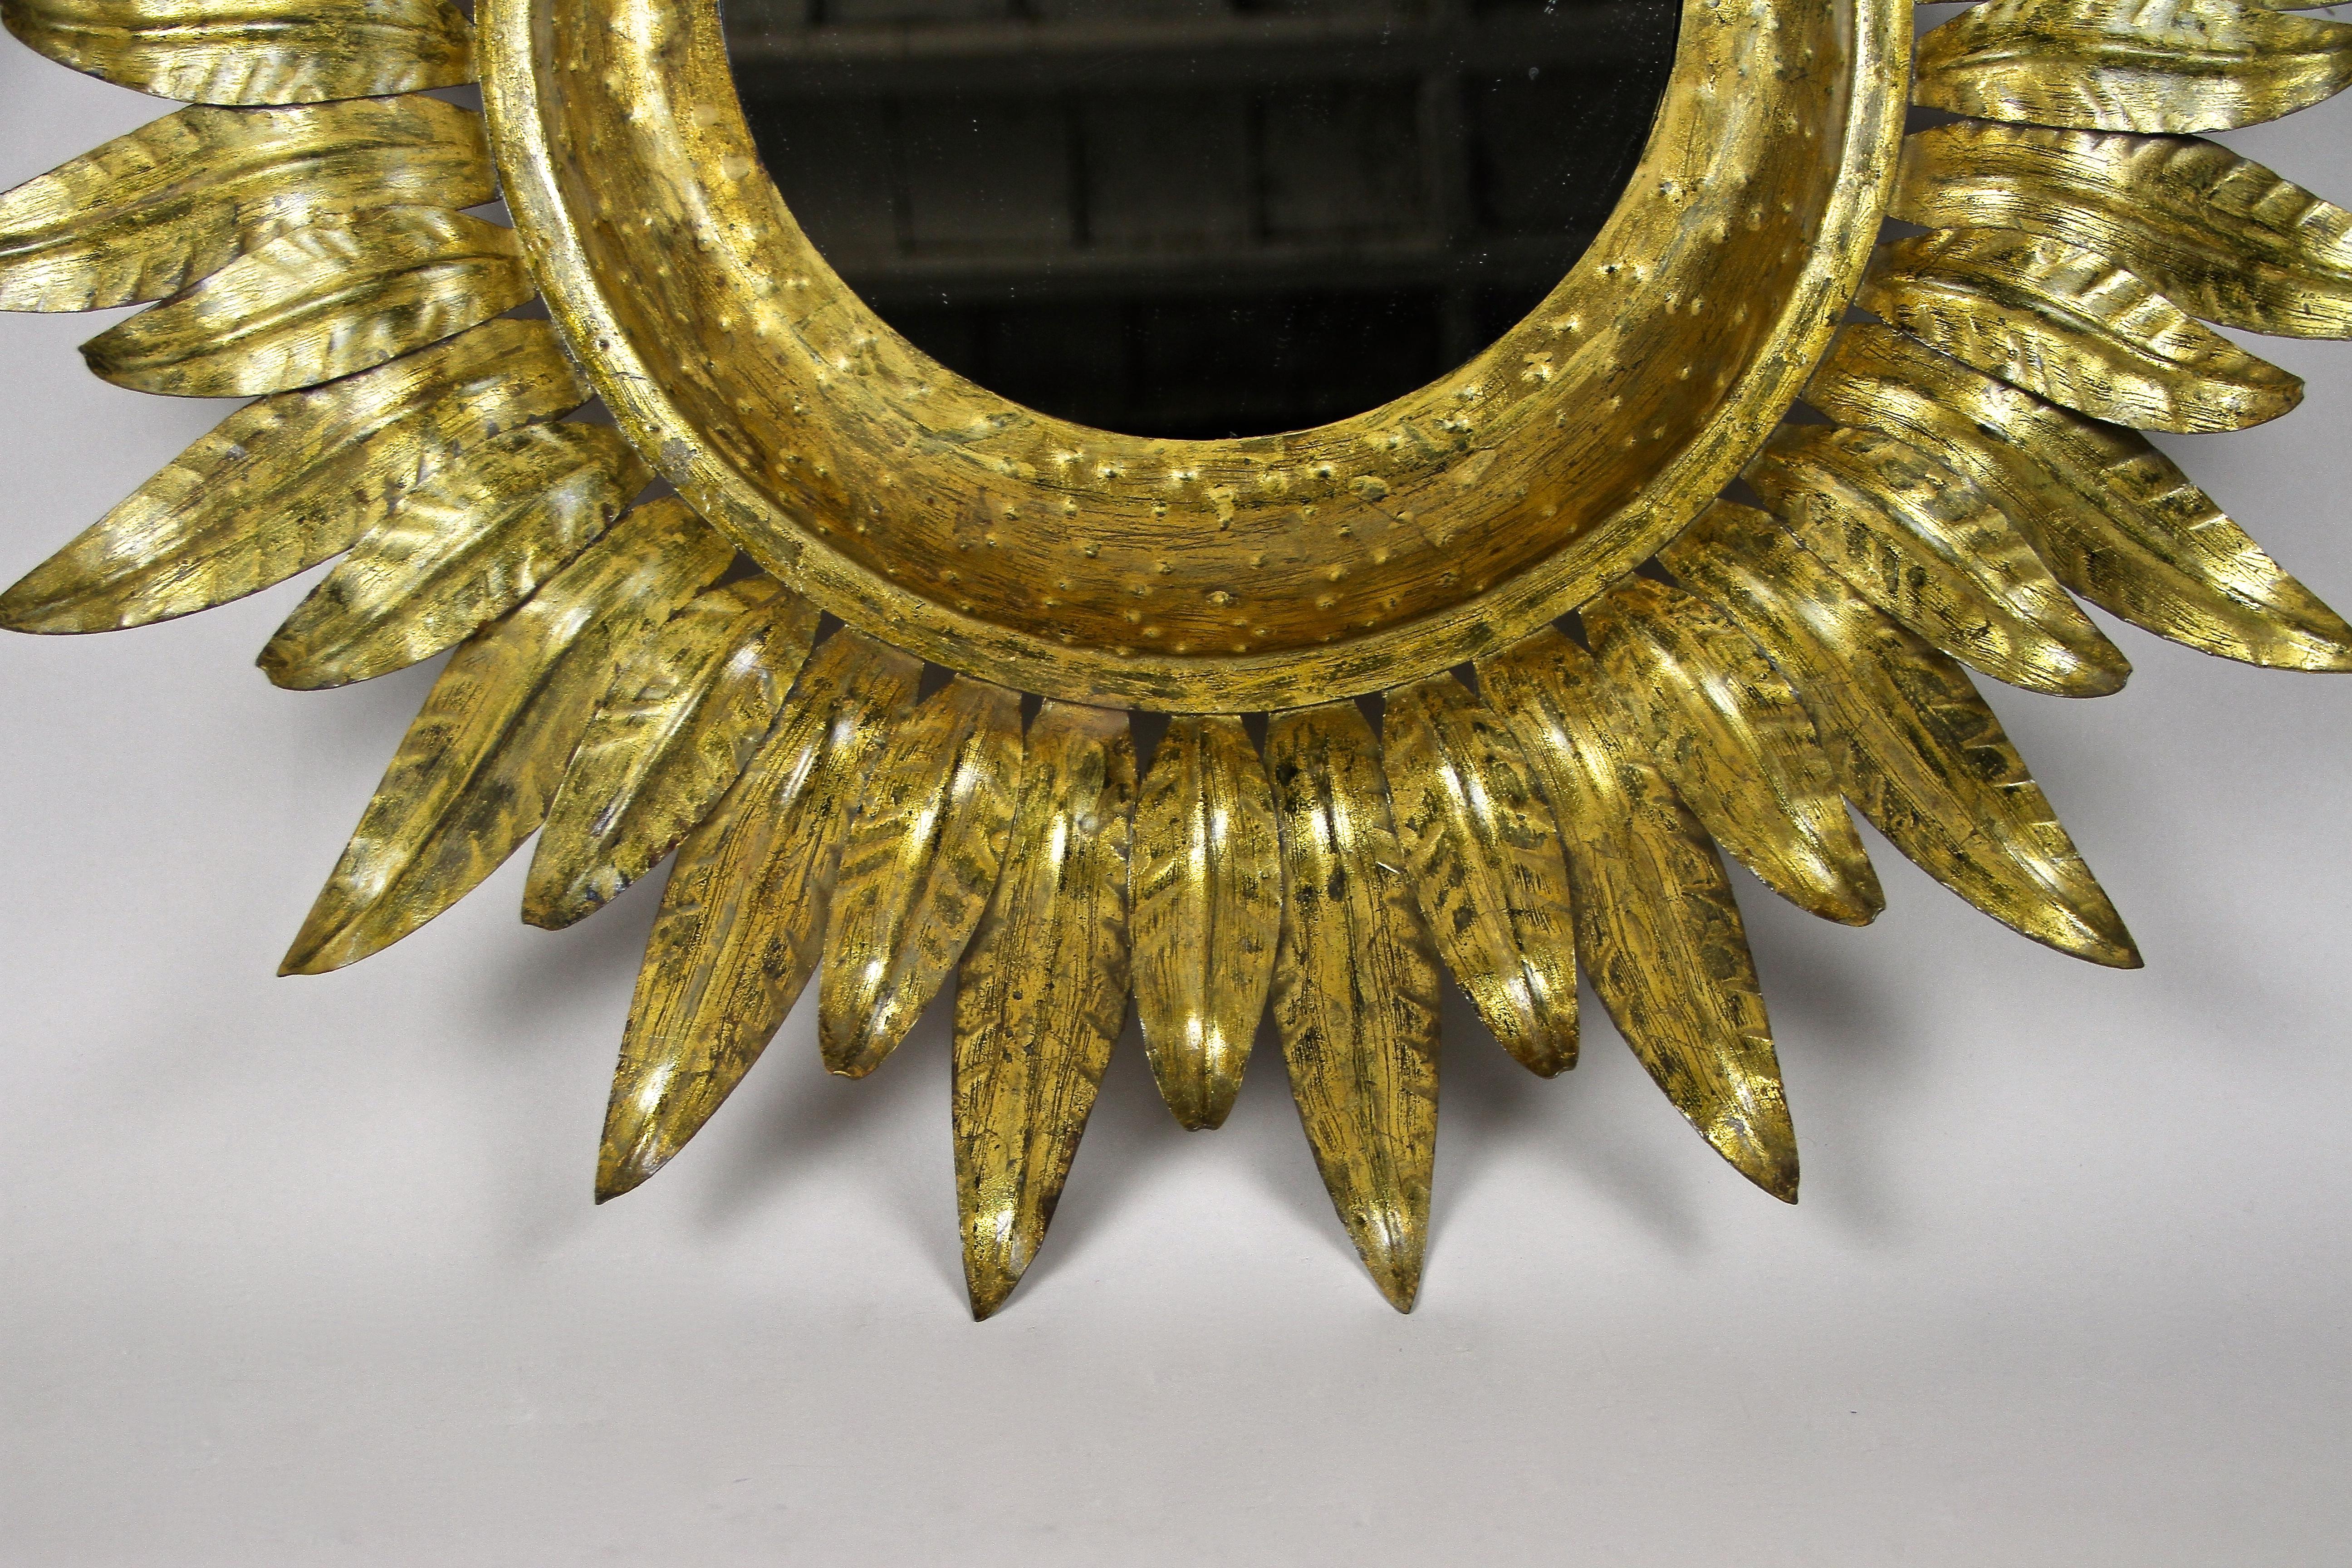 Sensational early 20th century sunburst wall mirror from the Art Deco period in France around 1920. This elaborately worked round mirror impresses with its artfully handcrafted foliage design made of composition gilt sheet metall. The gaps between